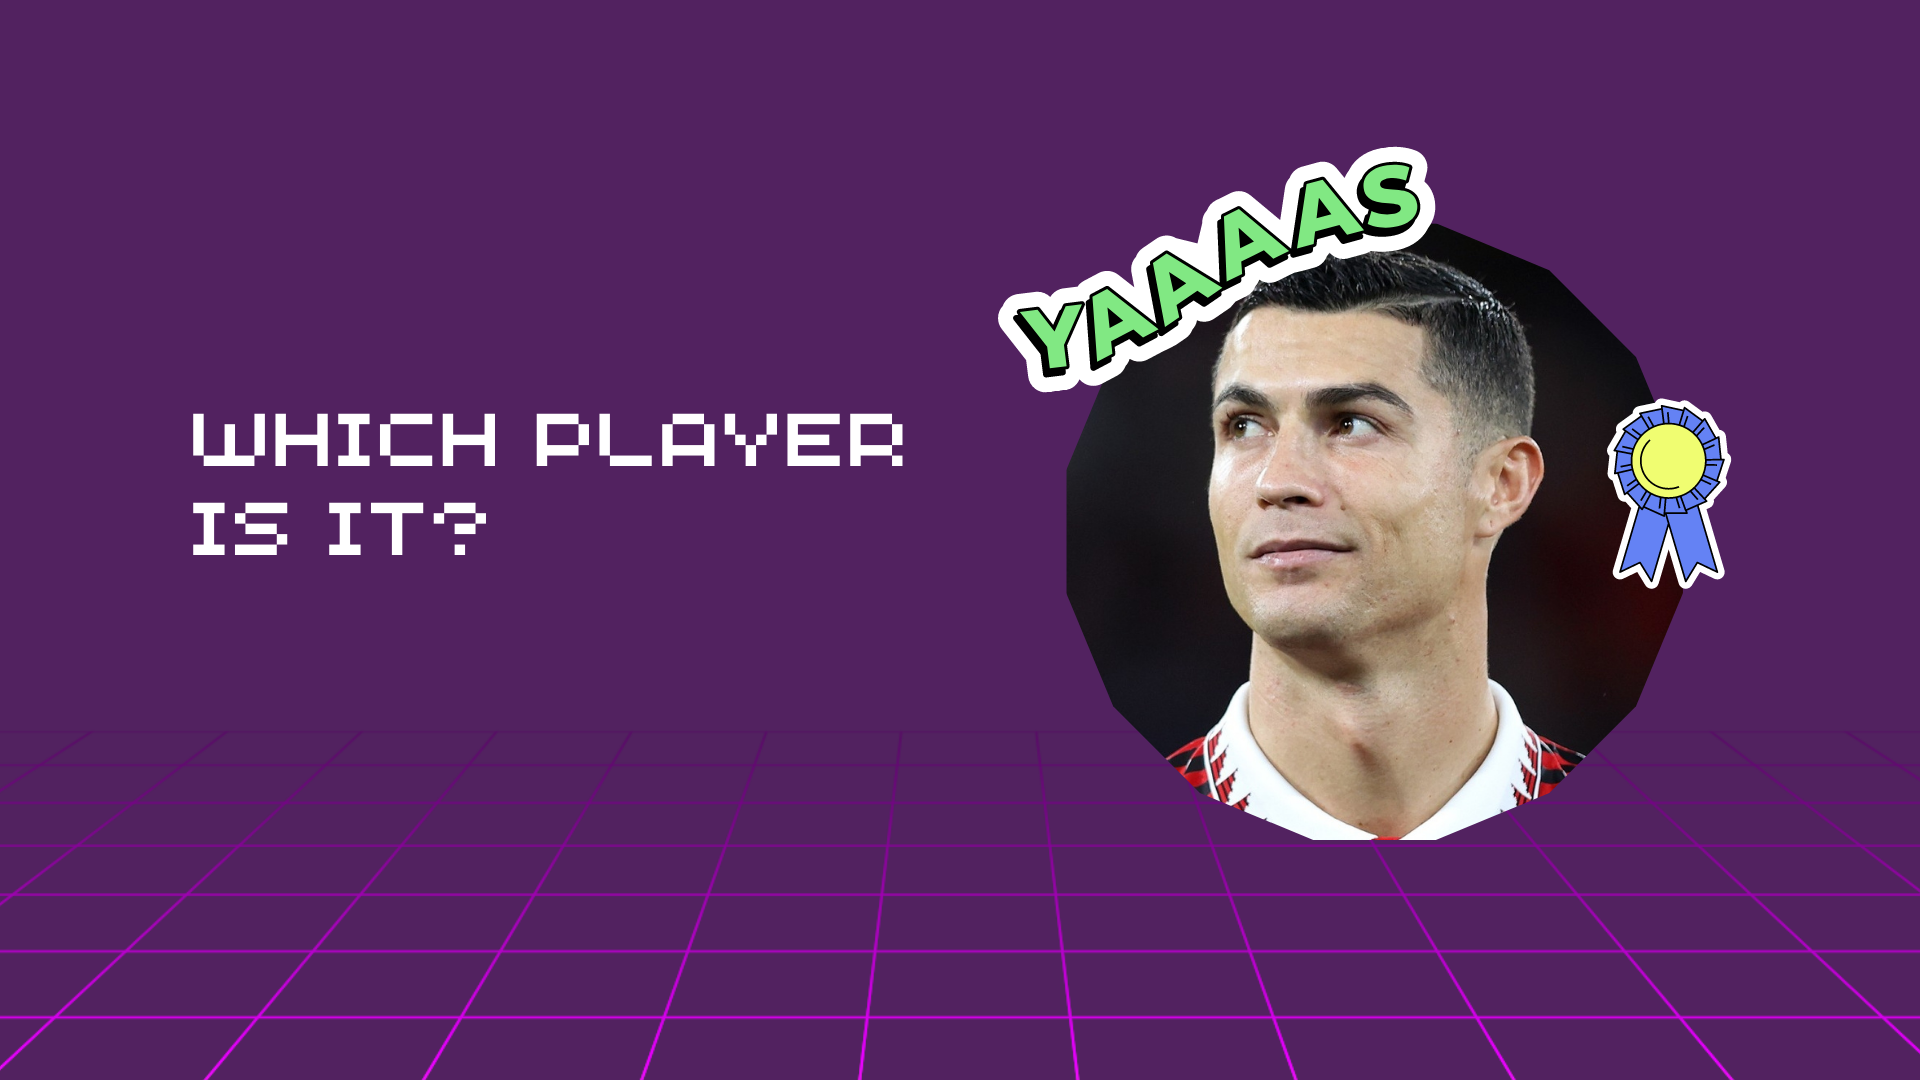 WHICH PLAYER IS IT?